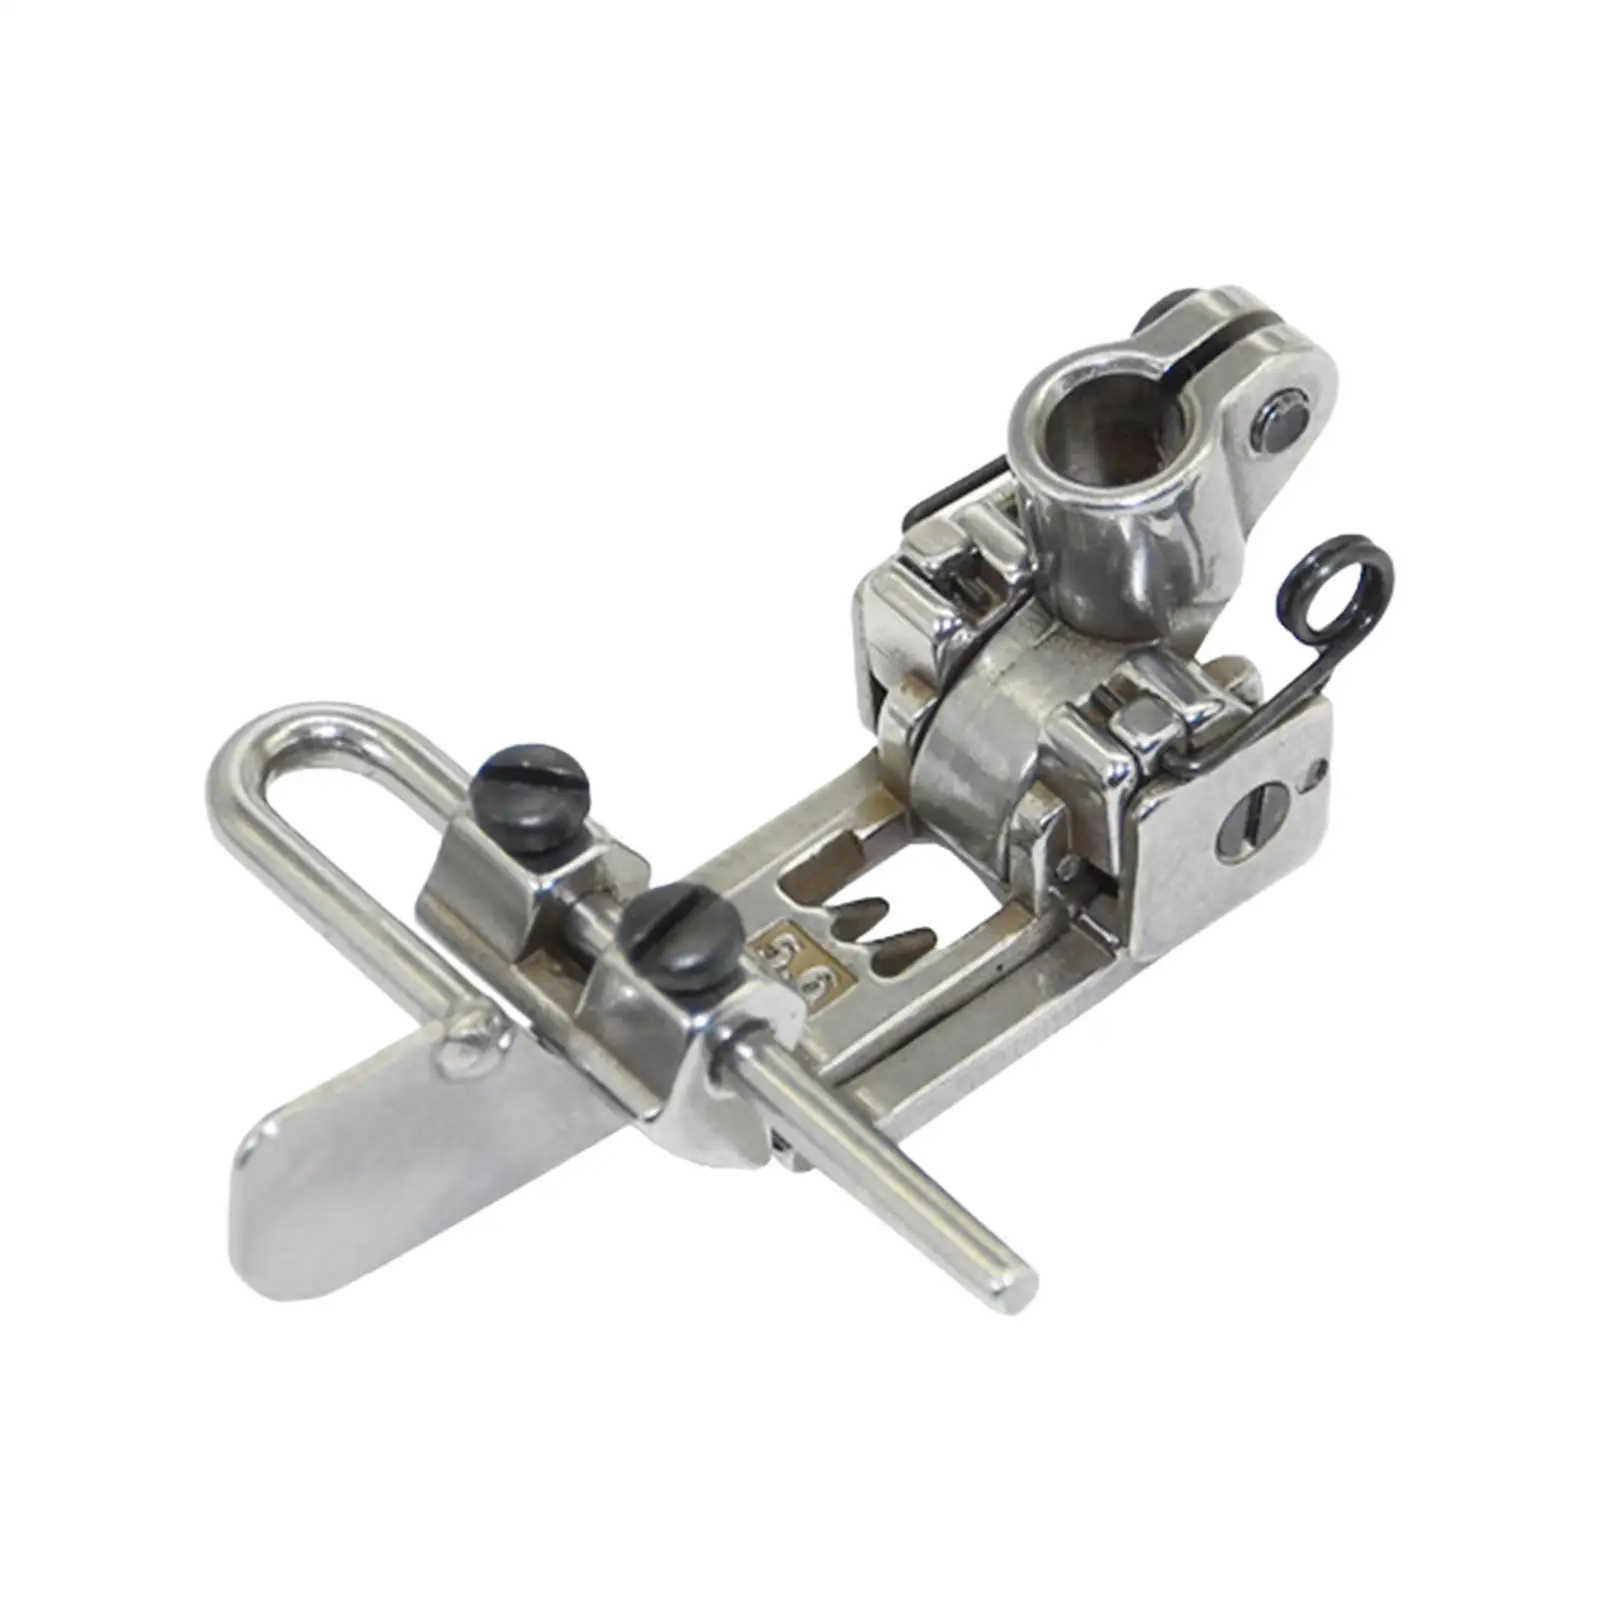 Sewing Machine Presser Foot Adjustable Quilting Patchwork Presser Foot for DIY Crafts Darning Cloth Fabric Sewing Apparel